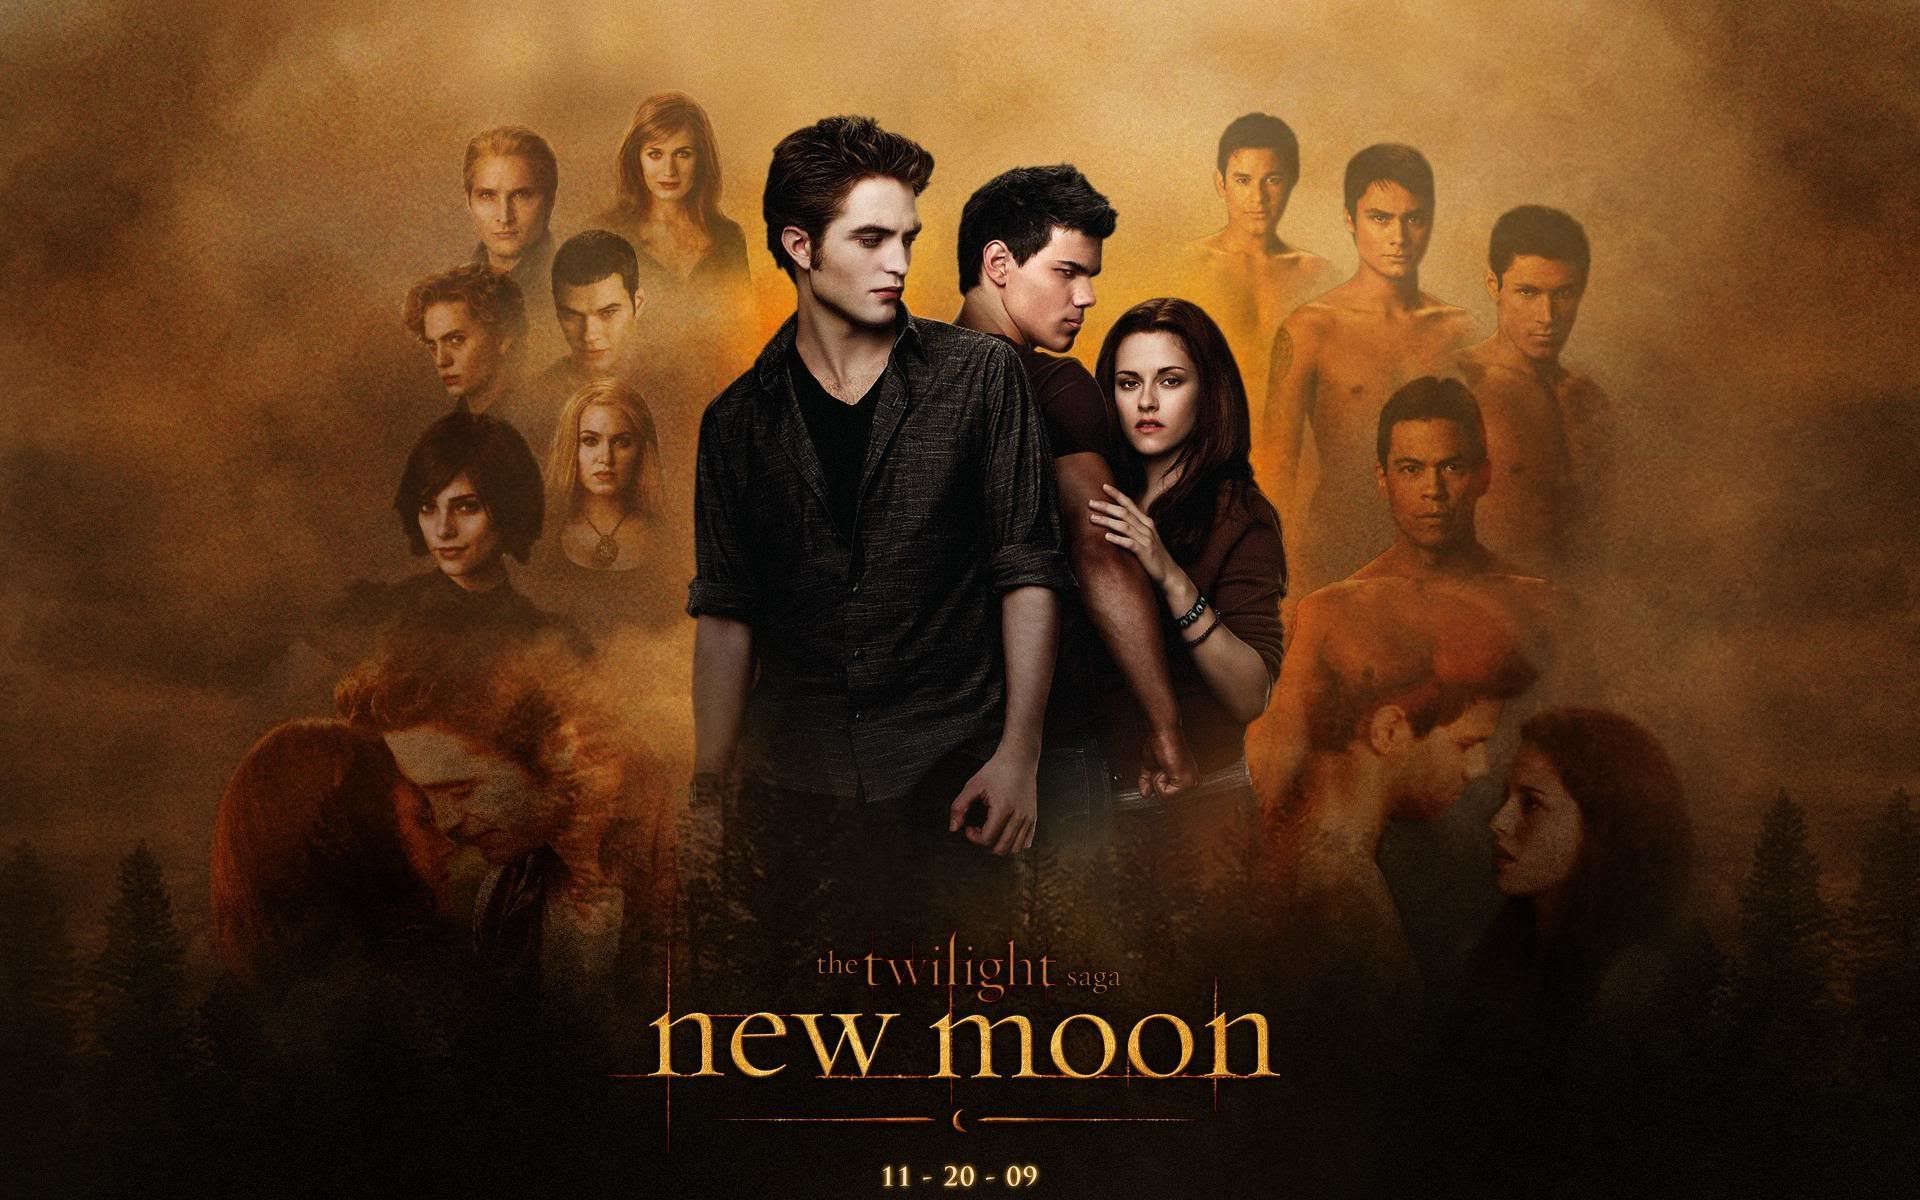 Free download The Twilight Saga New Moon Wallpaper and Background Image [1920x1200] for your Desktop, Mobile & Tablet. Explore Twilight Saga Picture Wallpaper. Free Twilight Wallpaper, Twilight Desktop Wallpaper